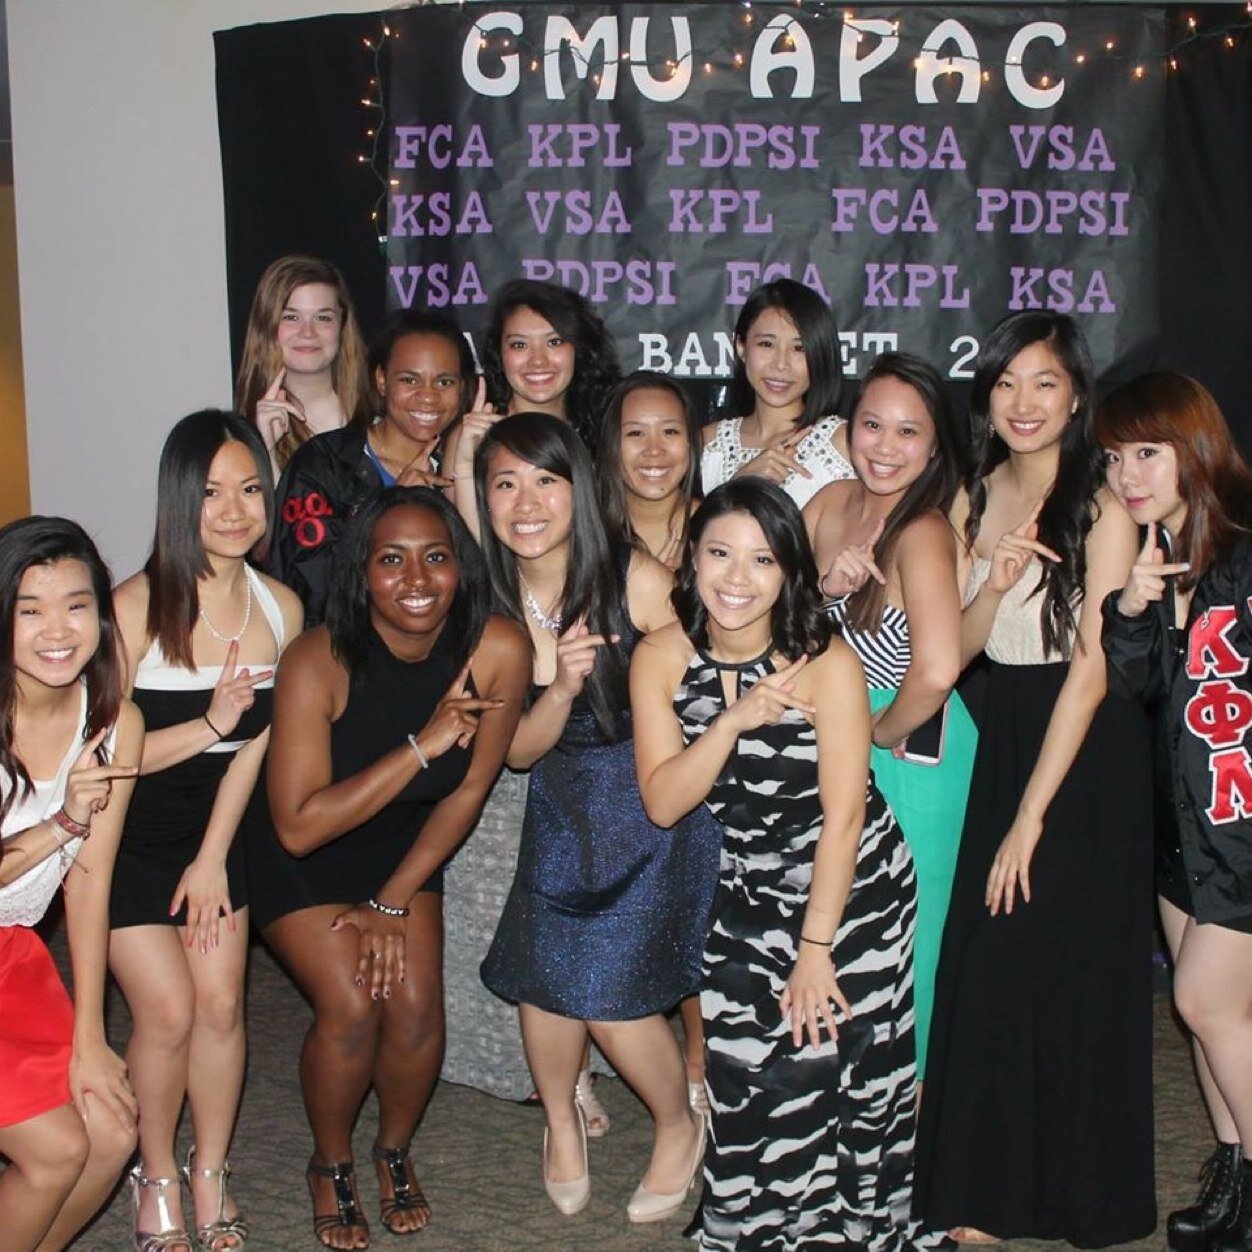 Established on Nov 13th, 2004 at GMU, Kappa Phi Lambda stands for Sisterhood, Service, and Cultural Diversity. The first&only Asian interest sorority on campus.